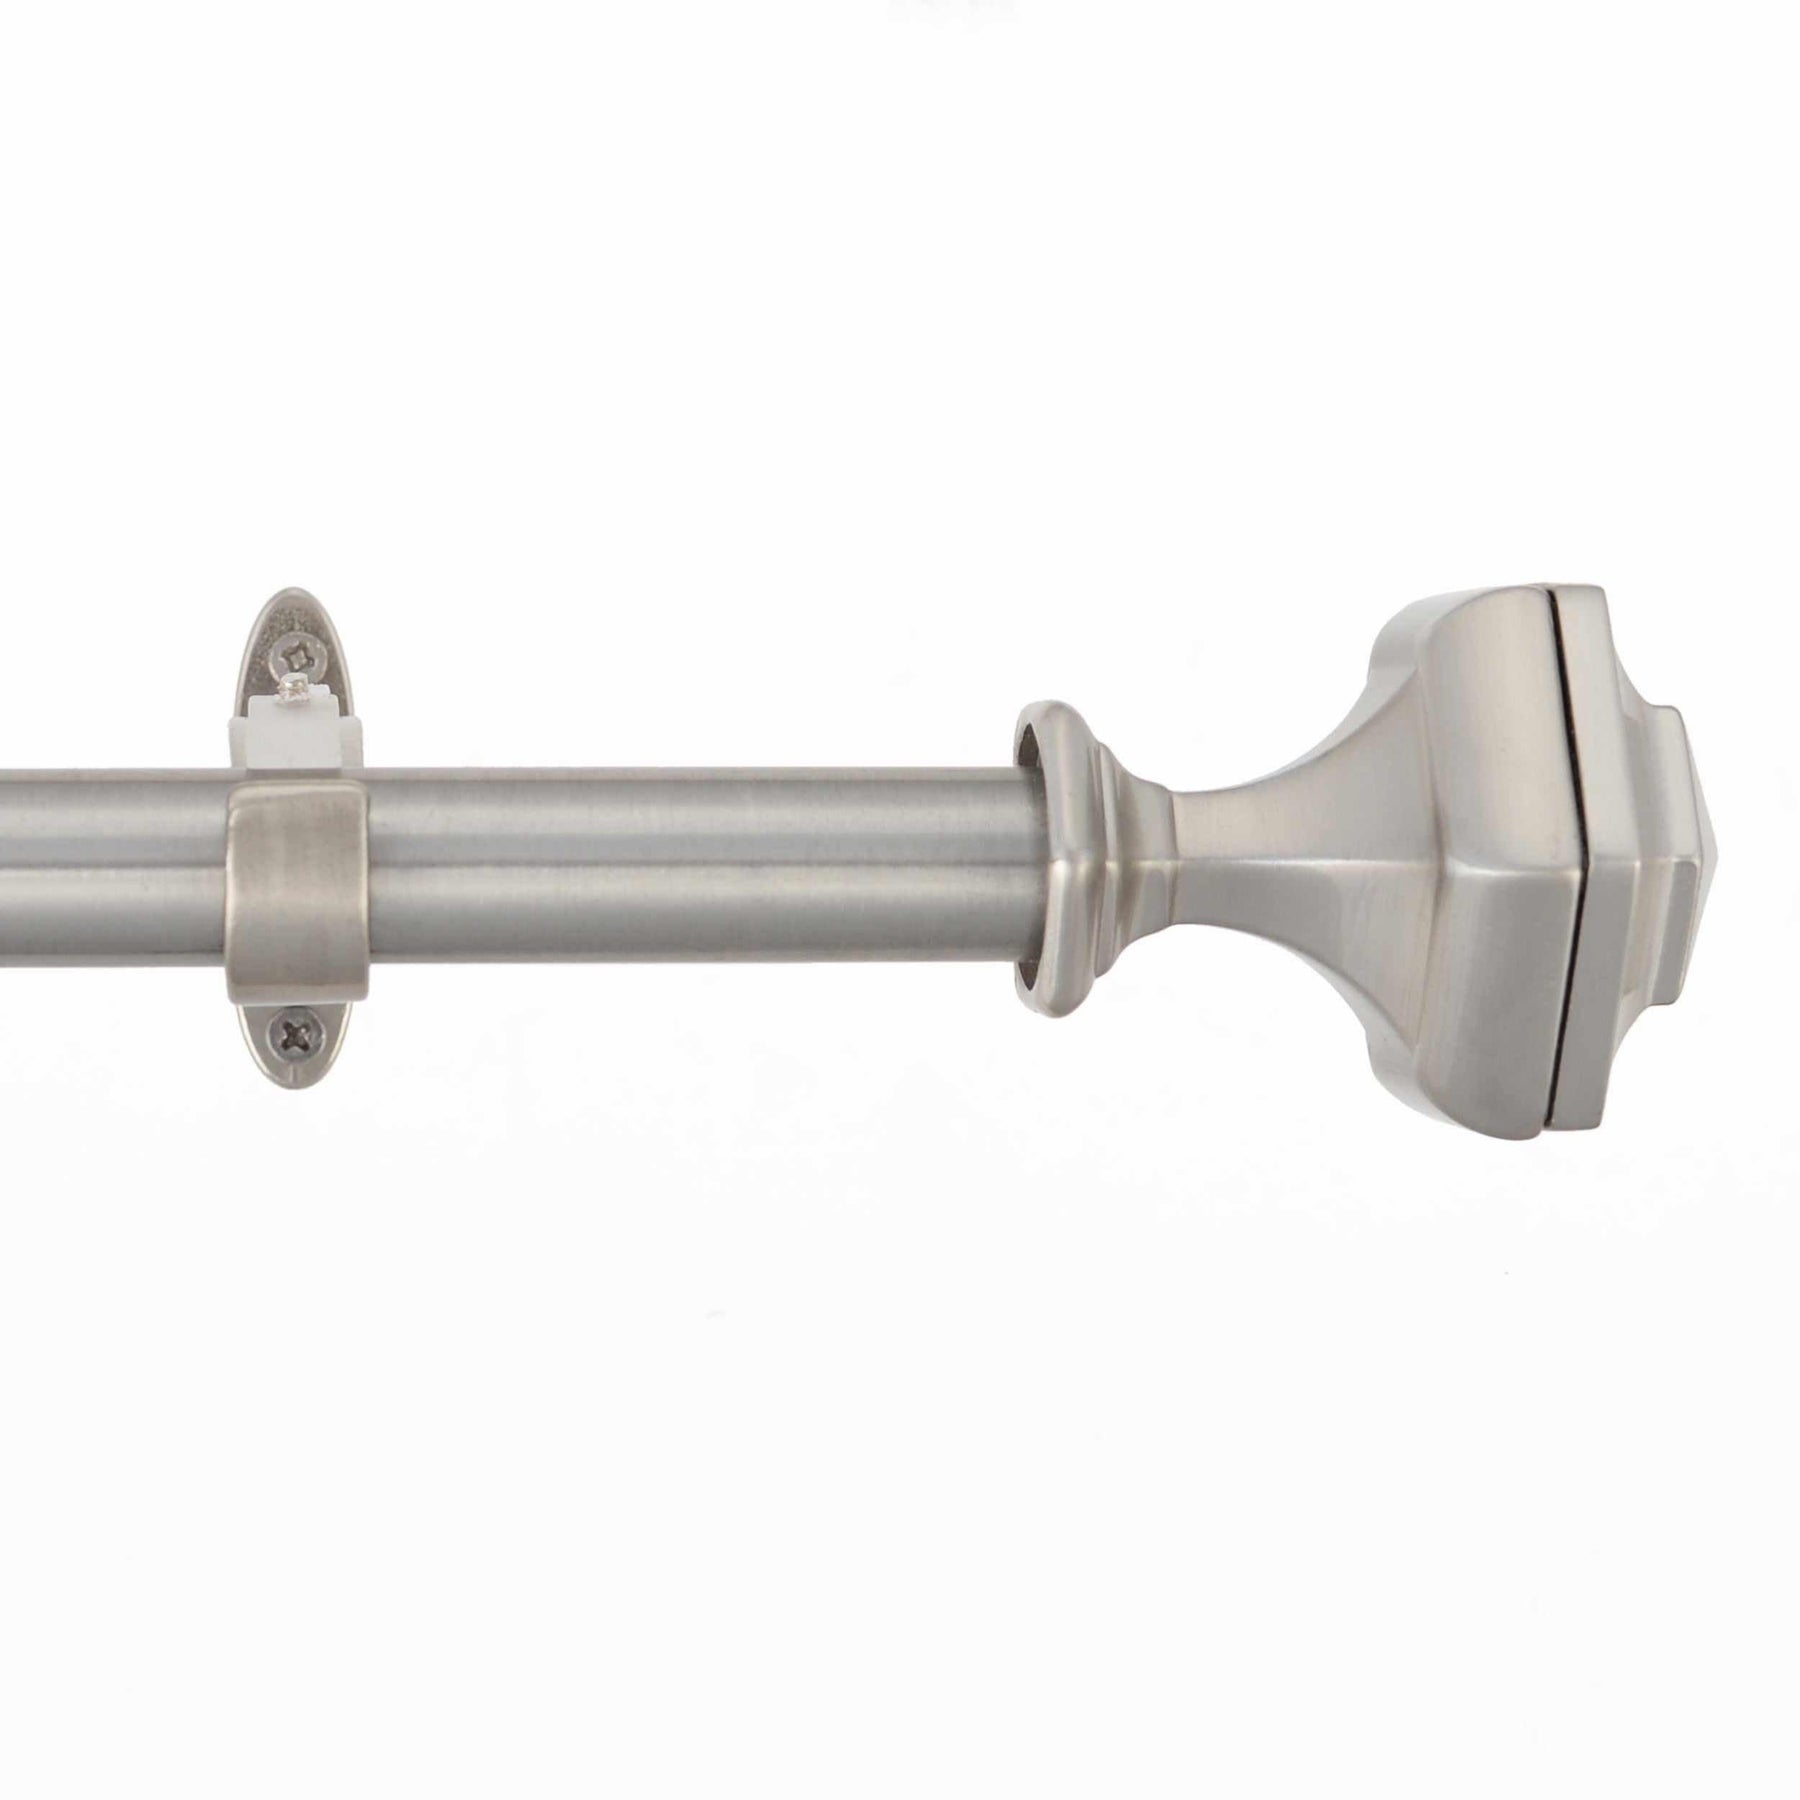 Tuscan Adjustable Curtain Rod in Brushed Nickel - Silver